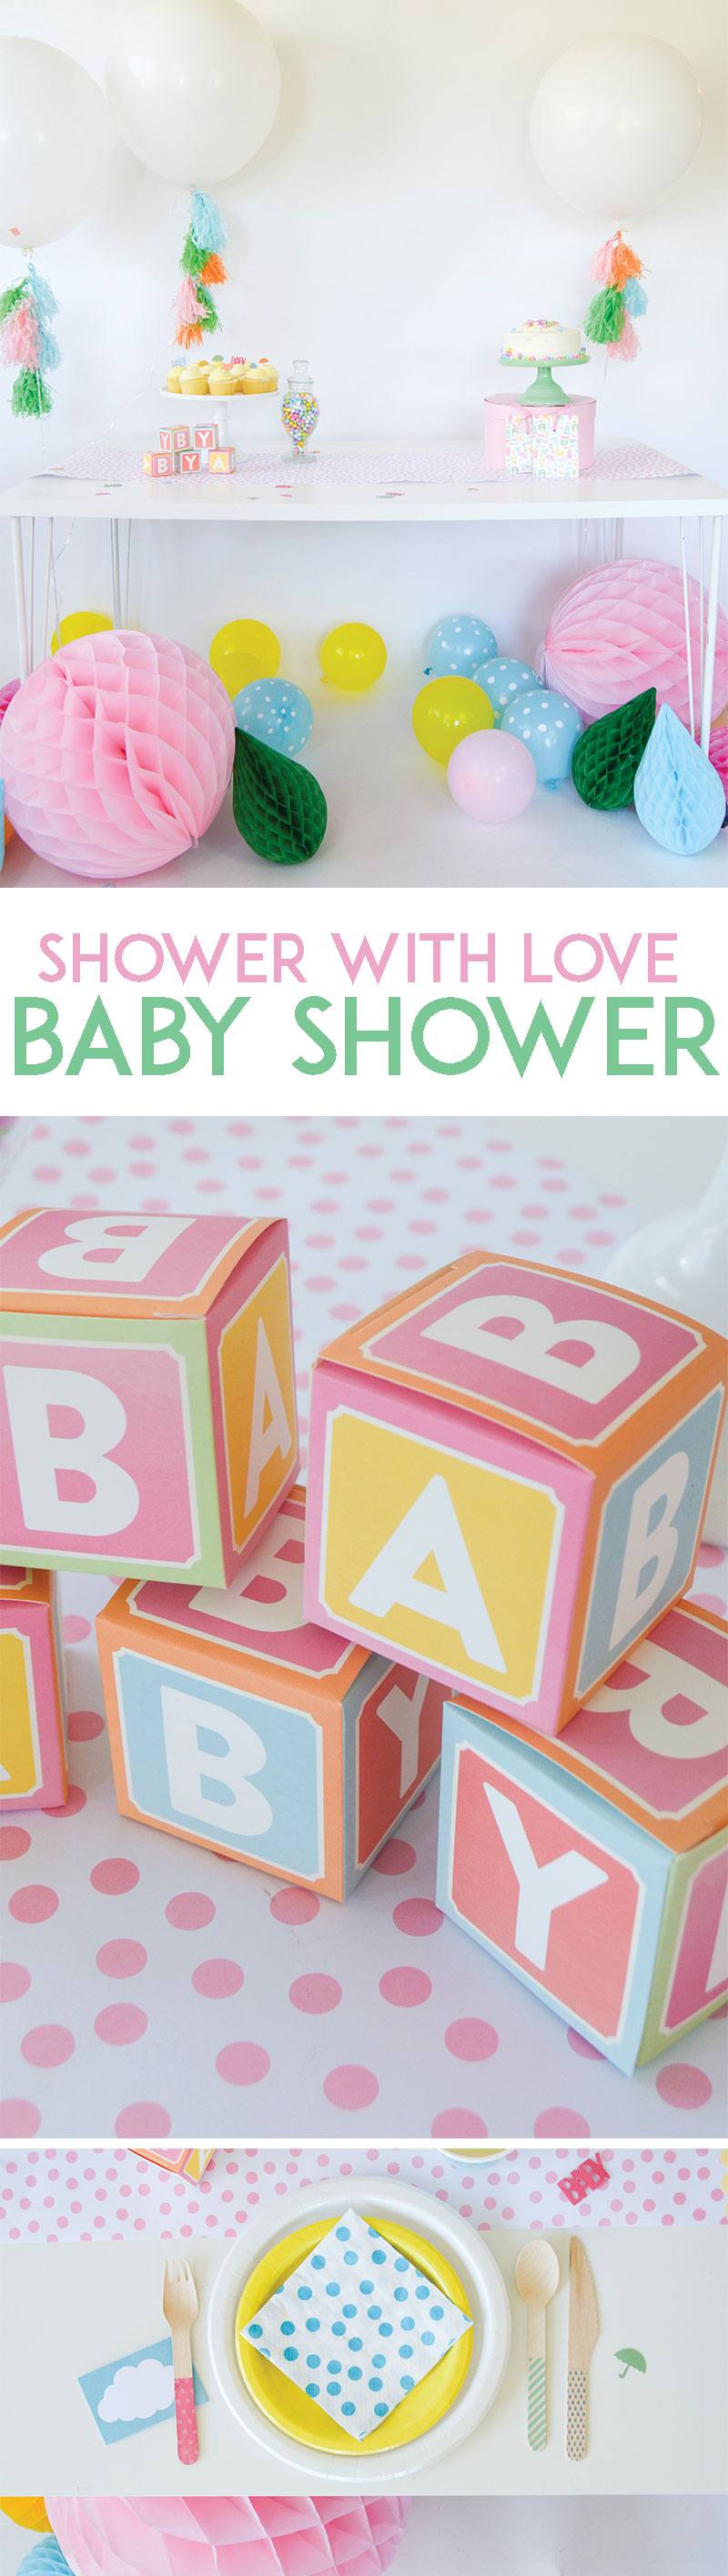 Shower With Love Baby Shower by Lindi Haws of Love The Day